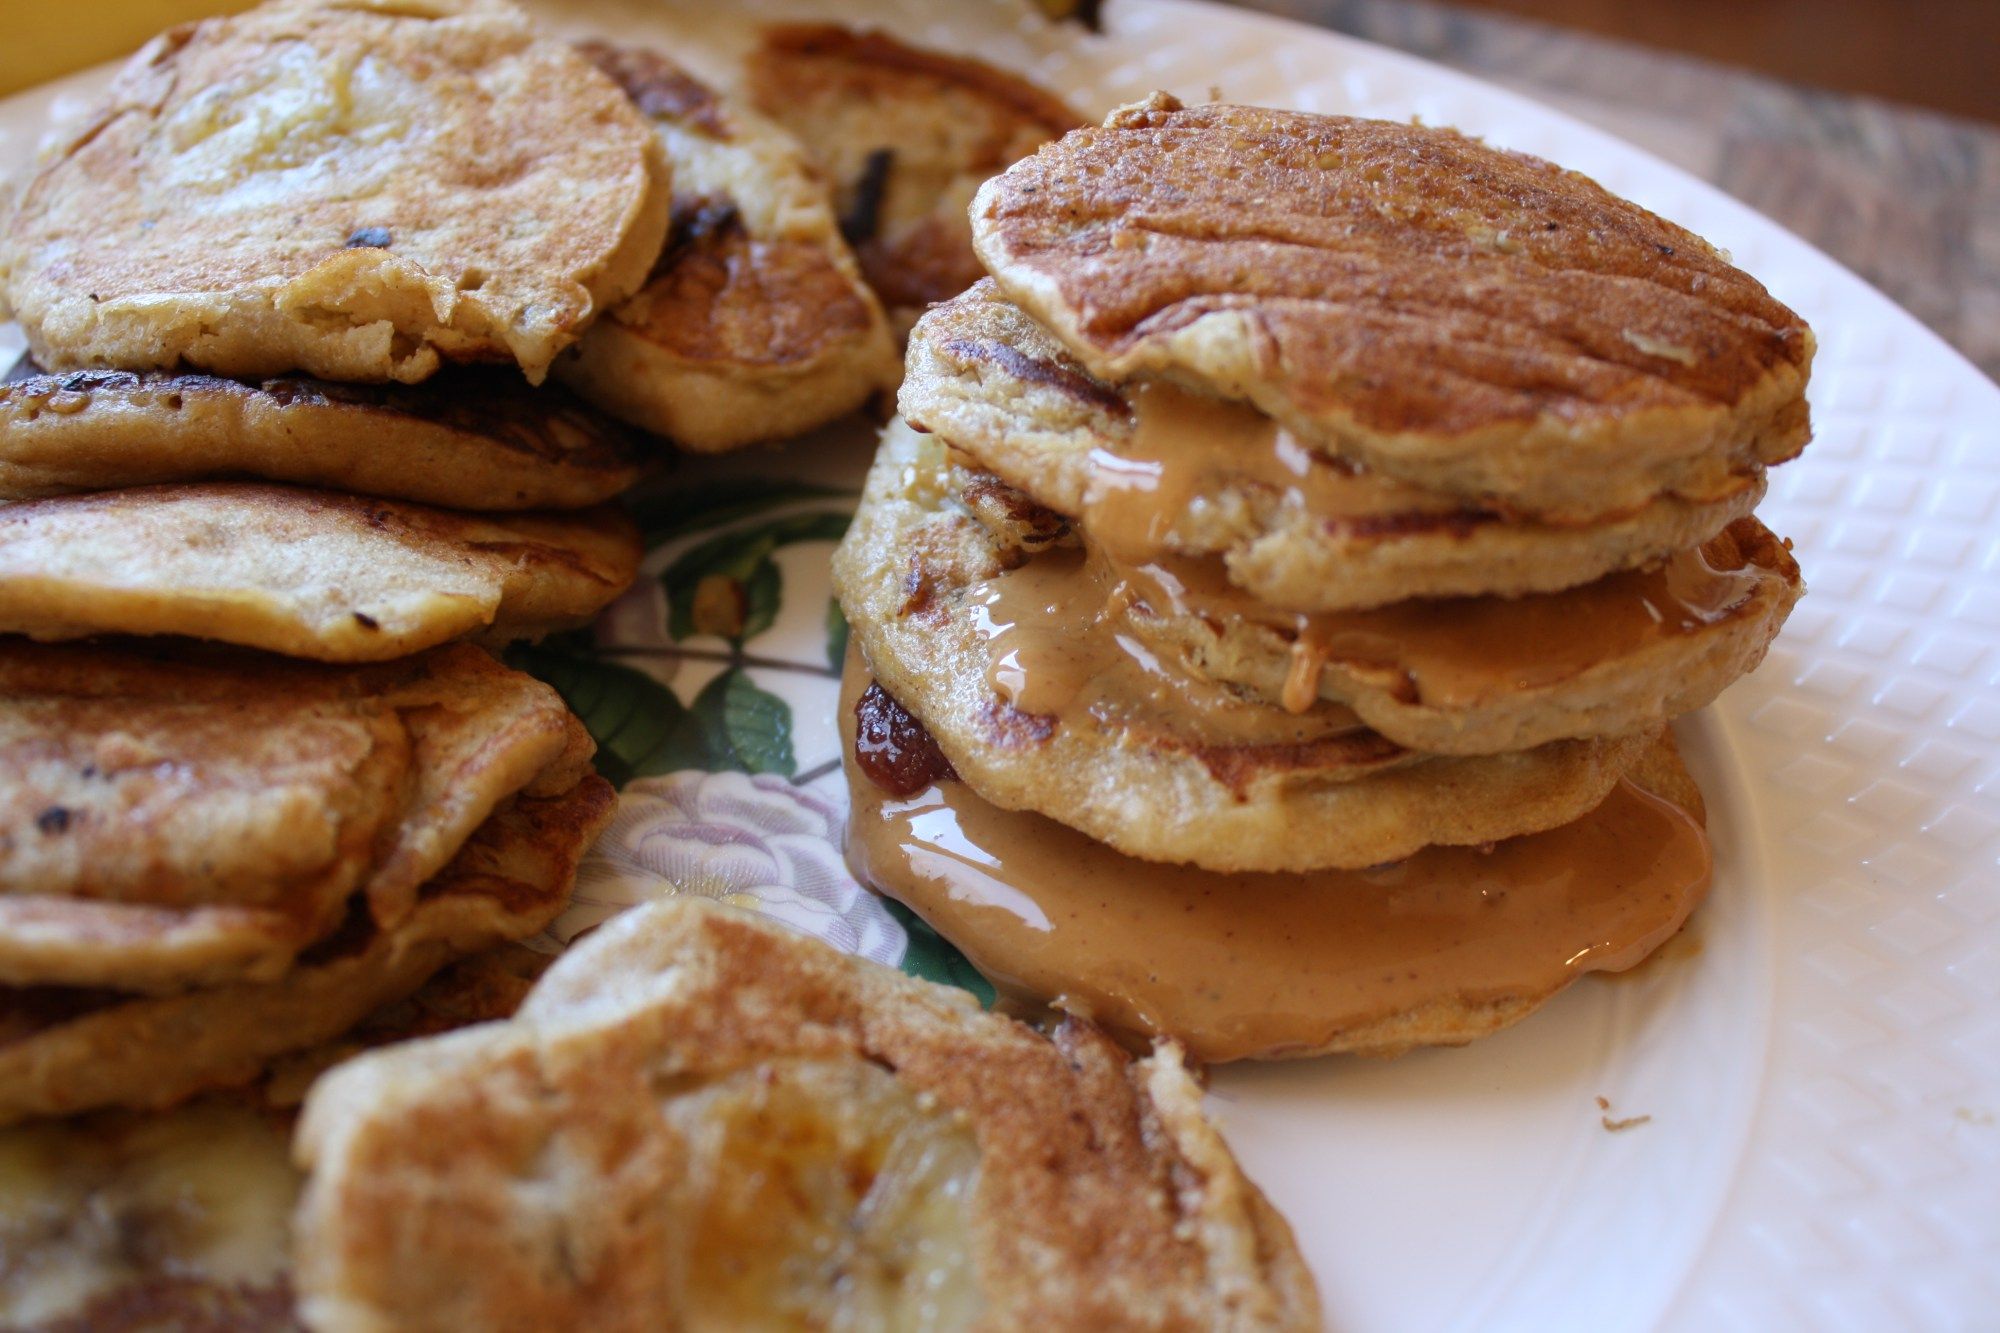 National Pancake Day - Celebrate with a Runner-Friendly Stack